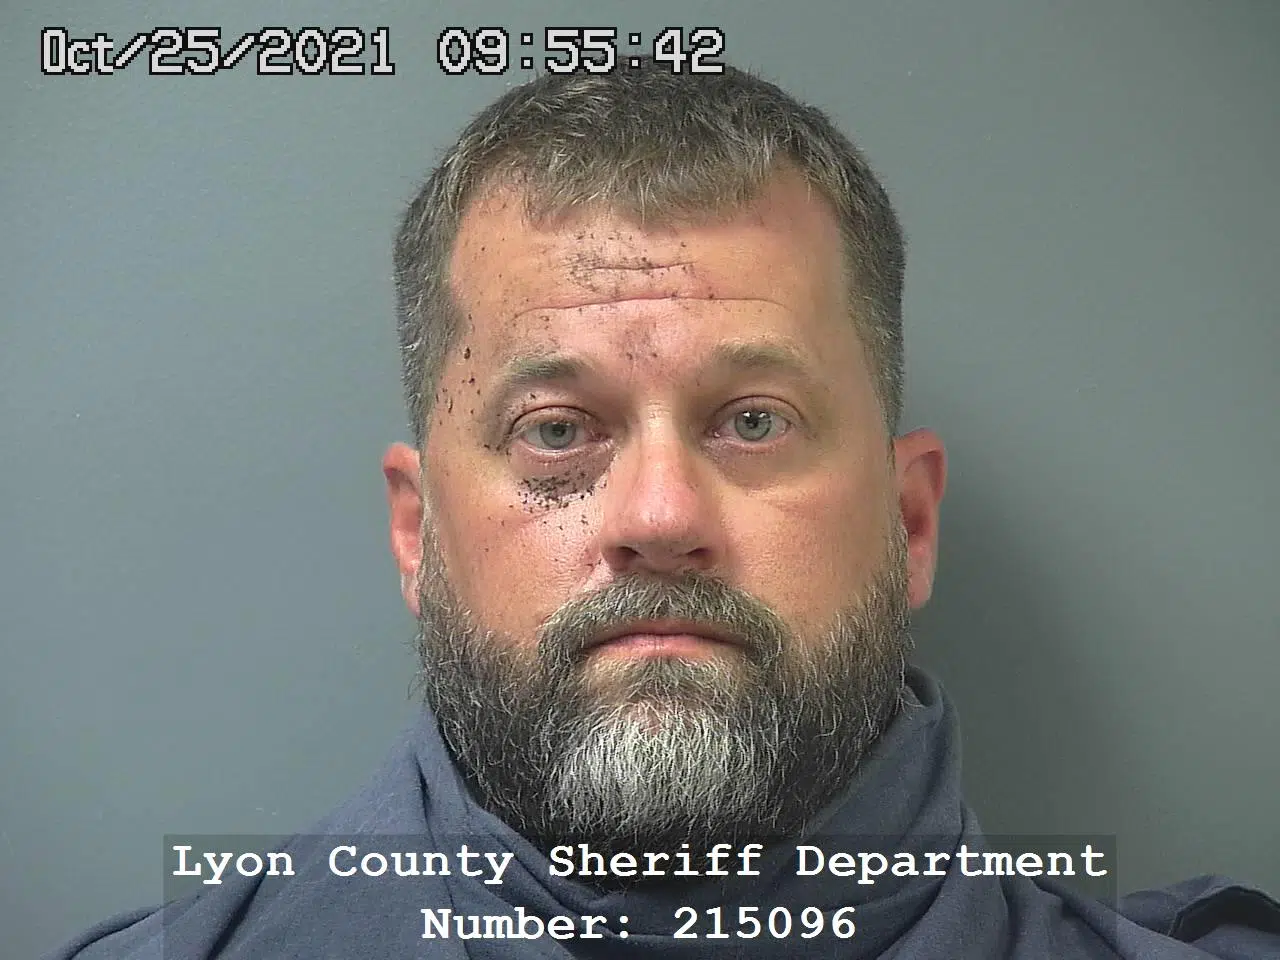 With Oklahoma bank robbery suspect sentenced to prison and restitution, Kansas chase case remains pending after October 2021 incident in Lyon County